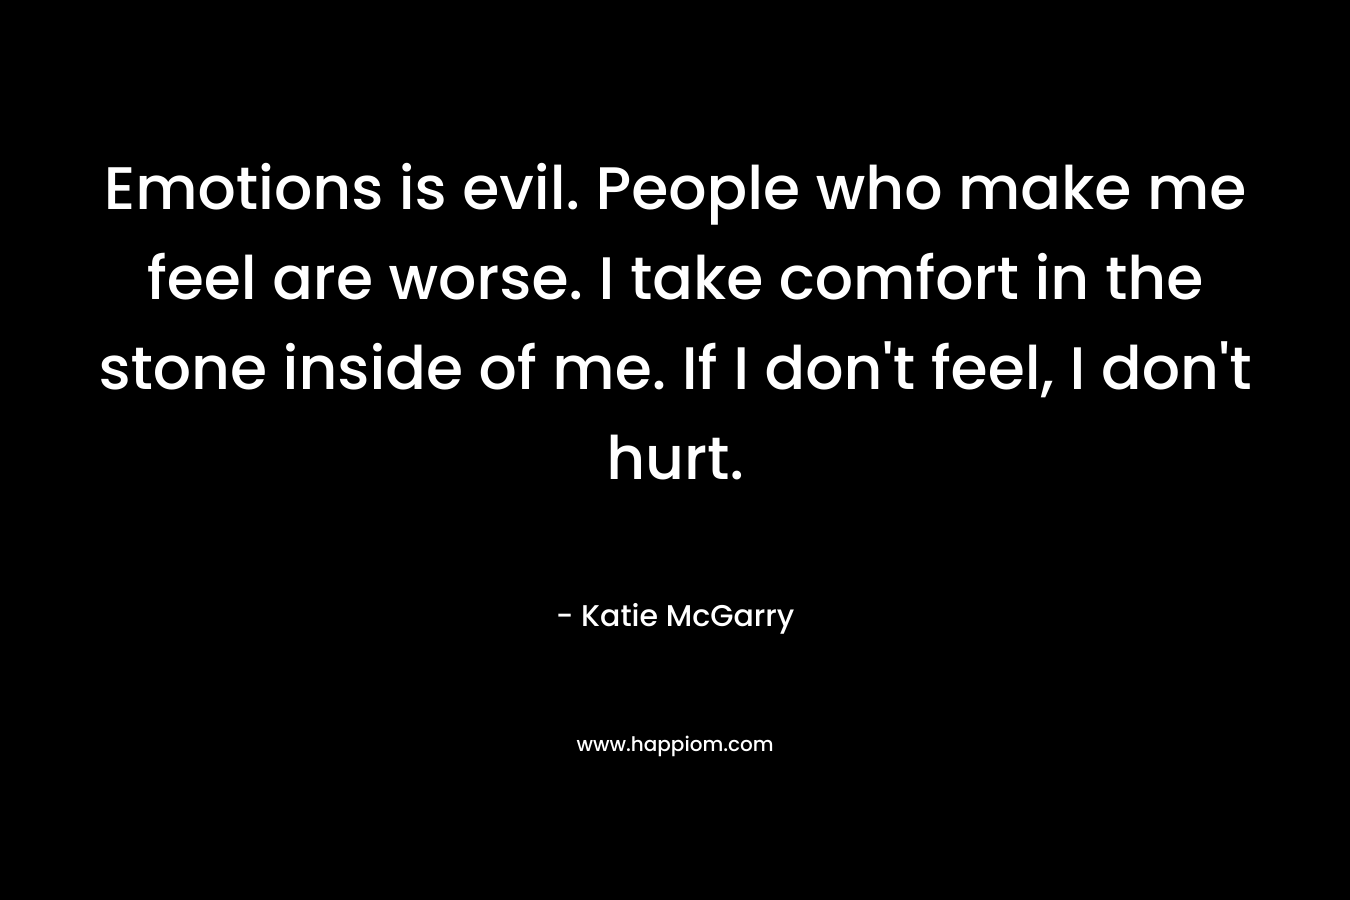 Emotions is evil. People who make me feel are worse. I take comfort in the stone inside of me. If I don't feel, I don't hurt.